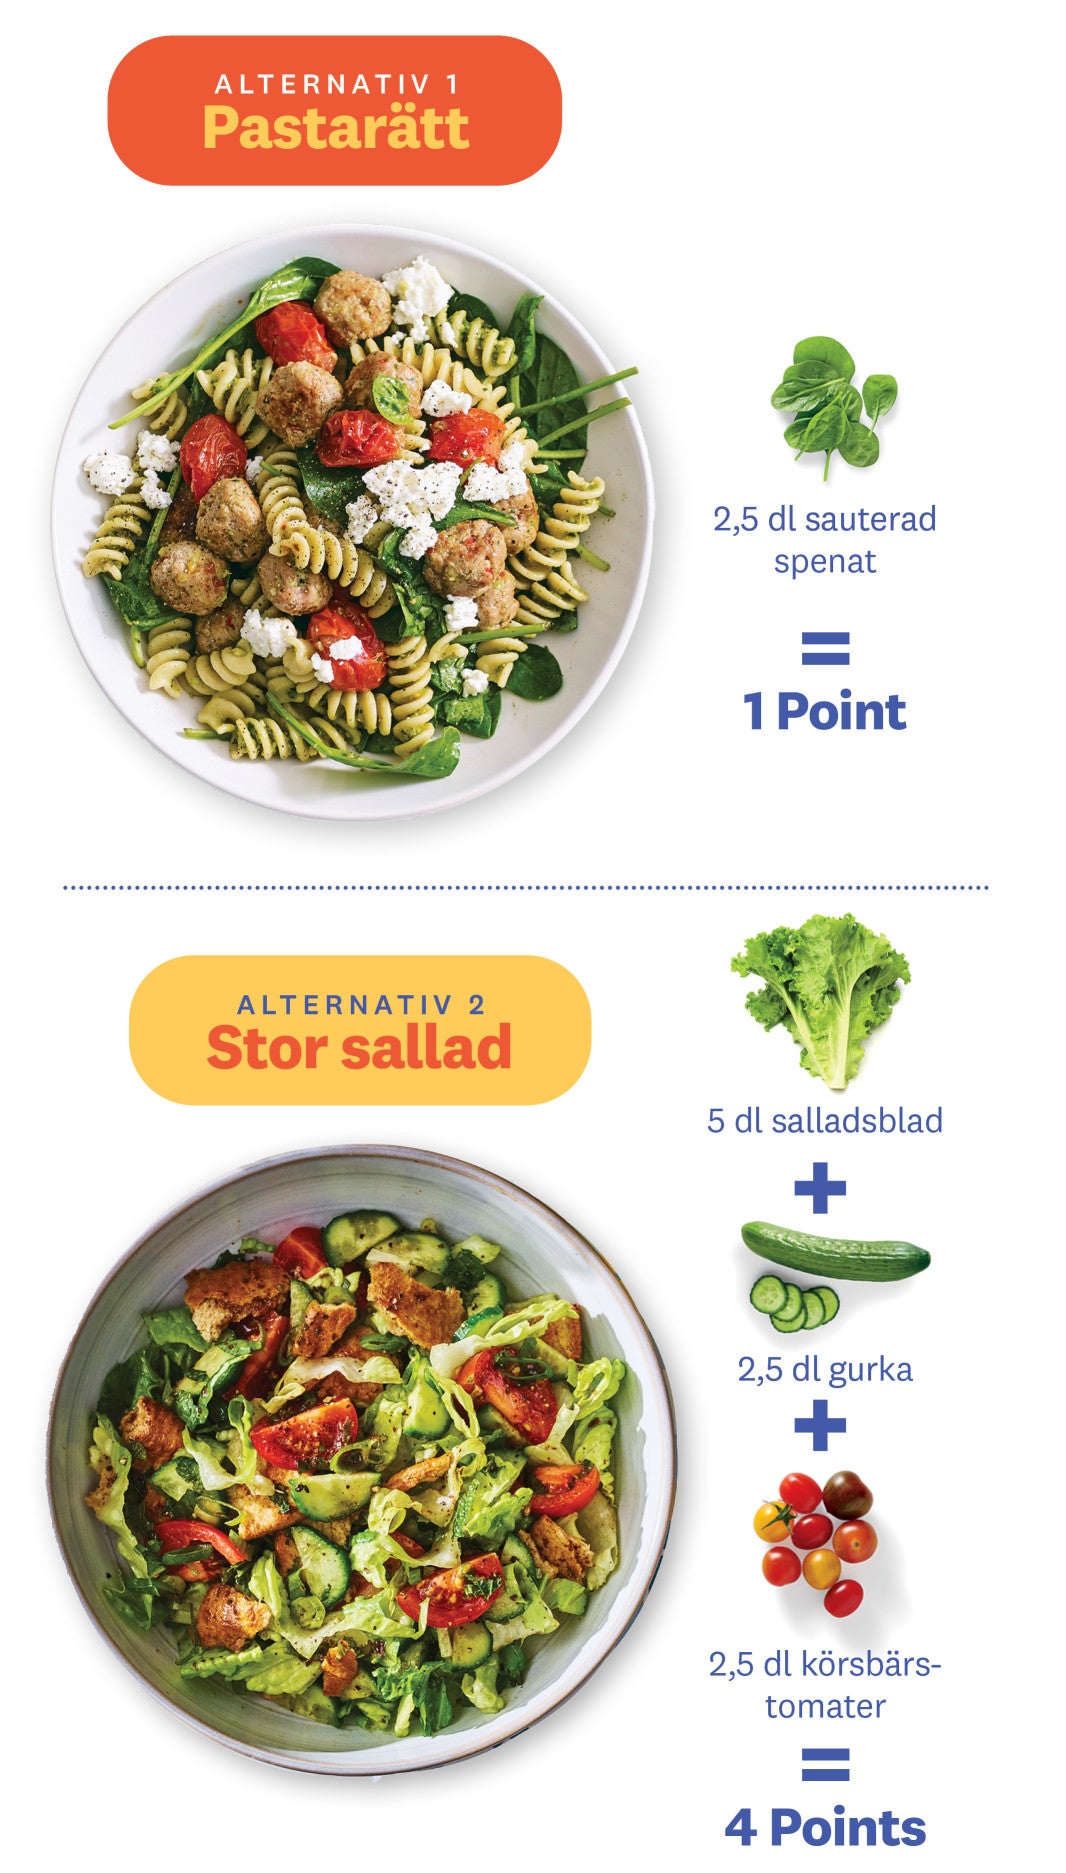 OPTION 1: PASTA DISH ½ cup of spinach + ½ cup of cherry tomatoes = Earns 1 Point; OPTION 2: BIG SALAD 2 cups of lettuce + 1 cup of cukes + 1 cup of cherry tomatoes = Earns 4 Points